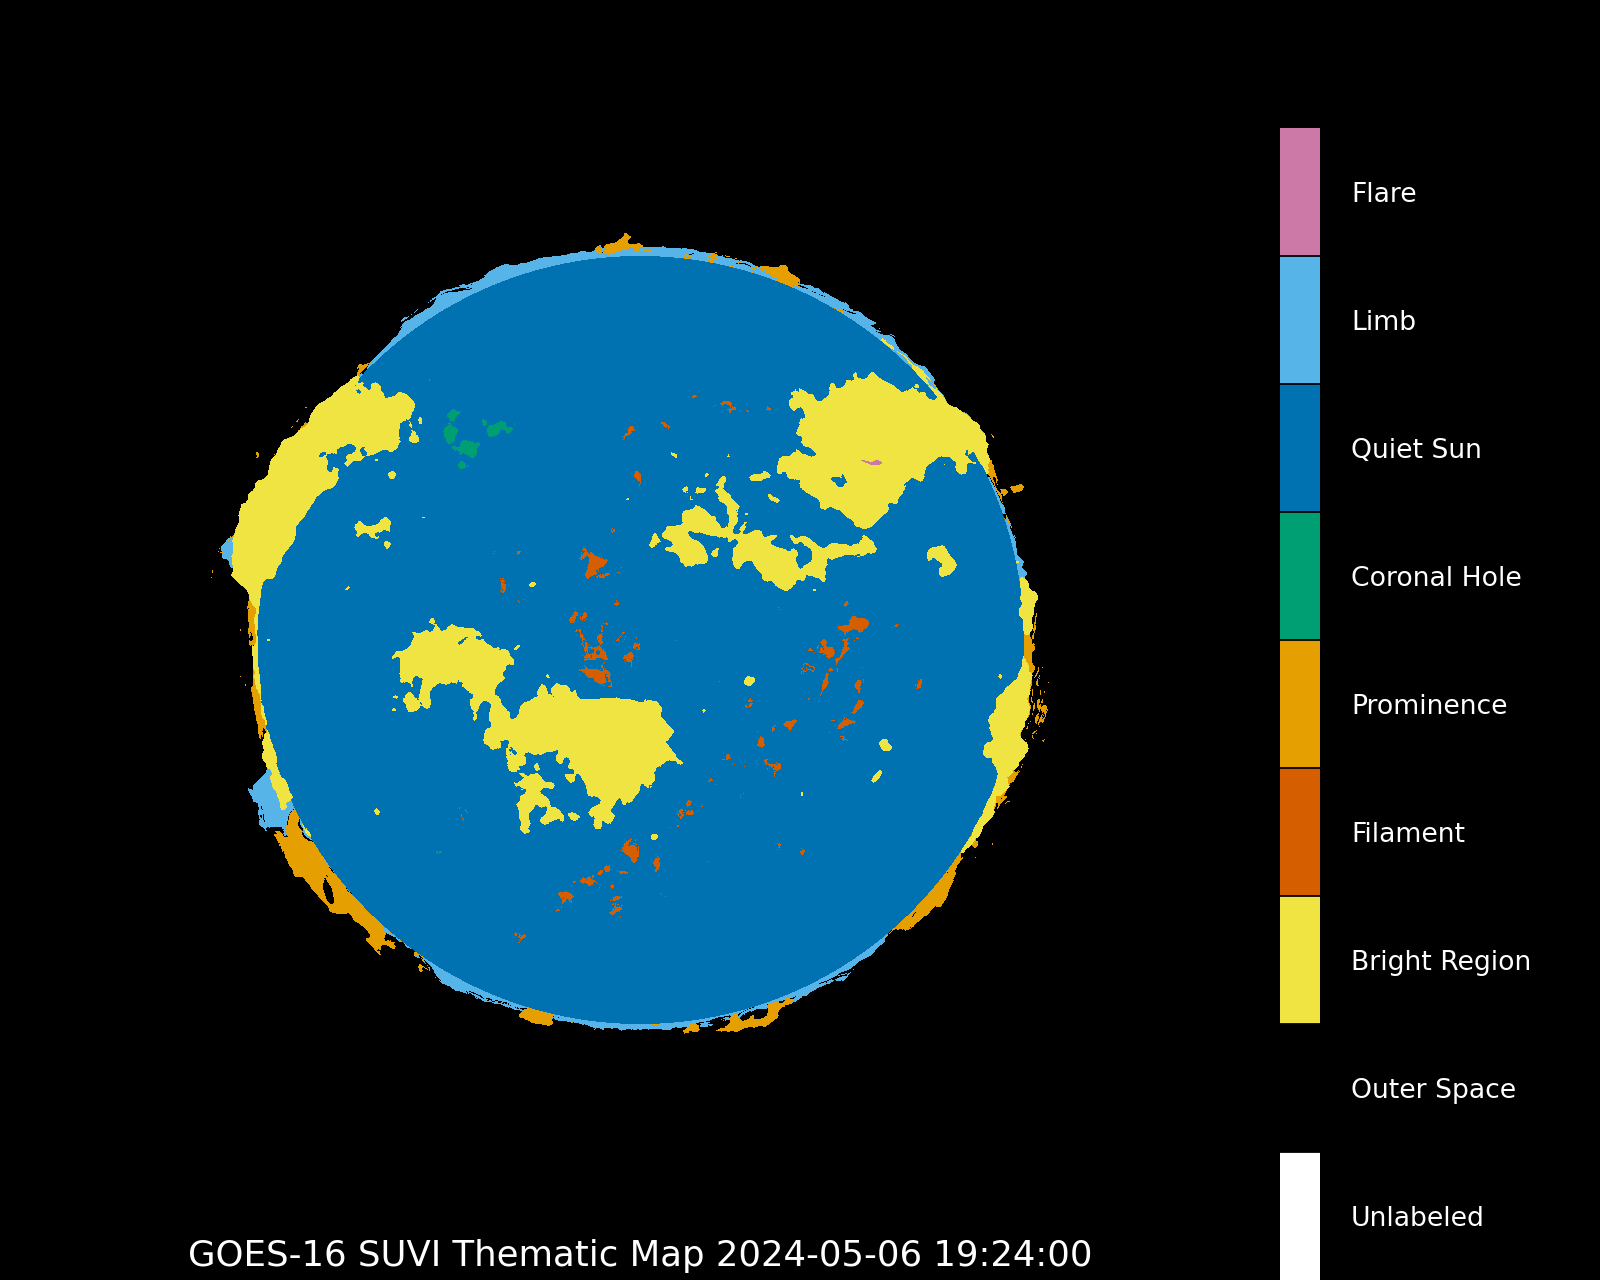 GOES-16 SUVI Thematic Map